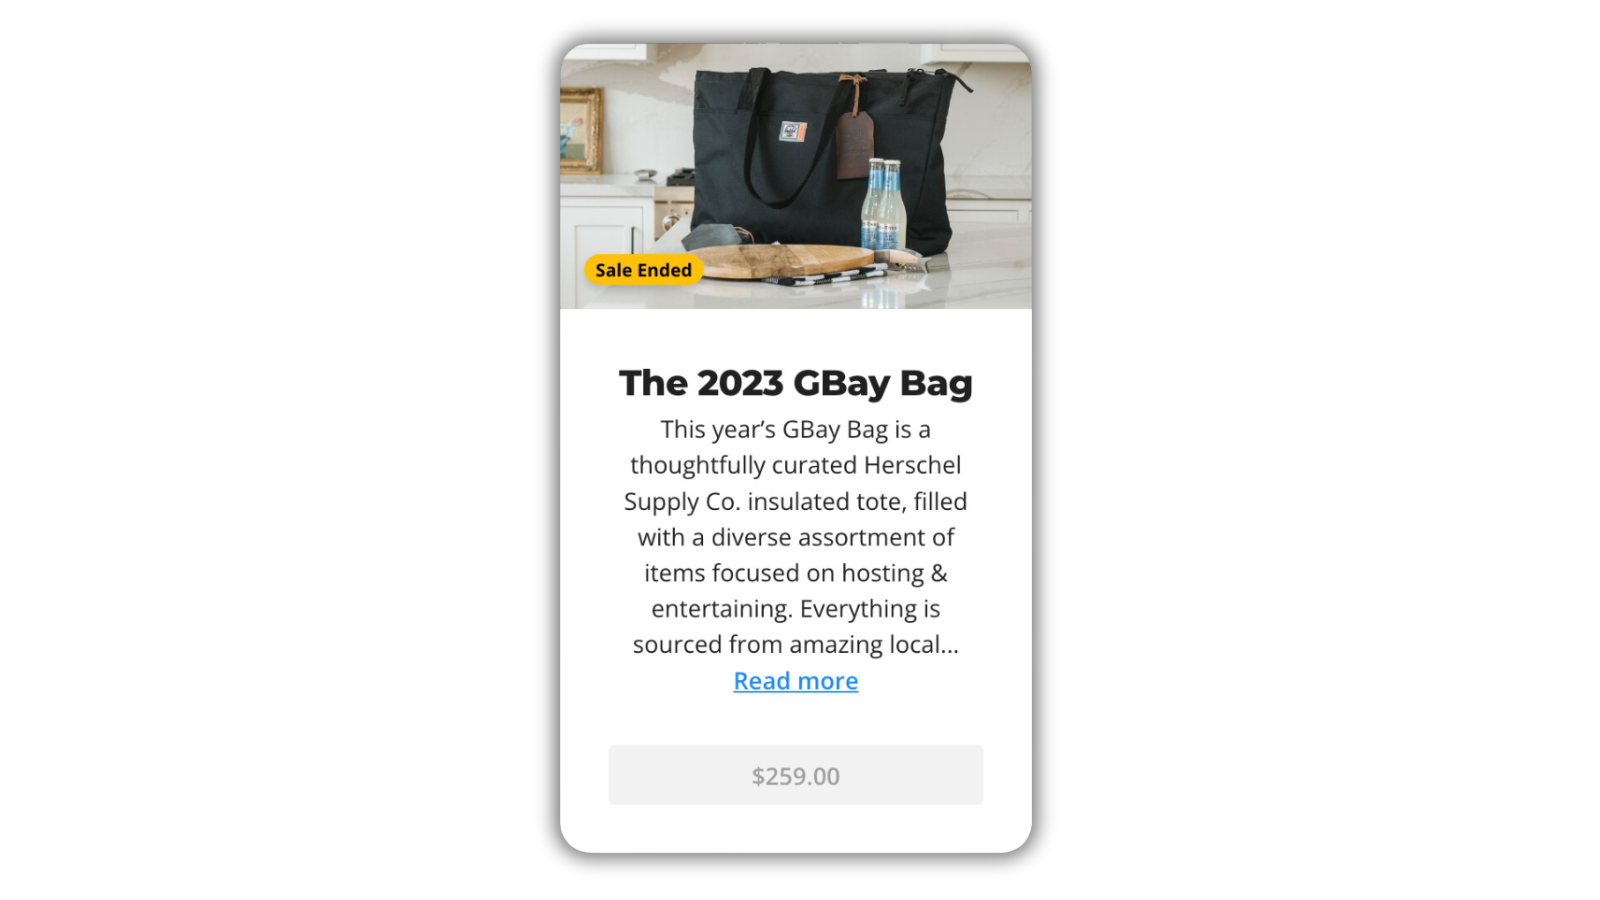 screenshot of GBay bags for sale on GBGH fundraising page